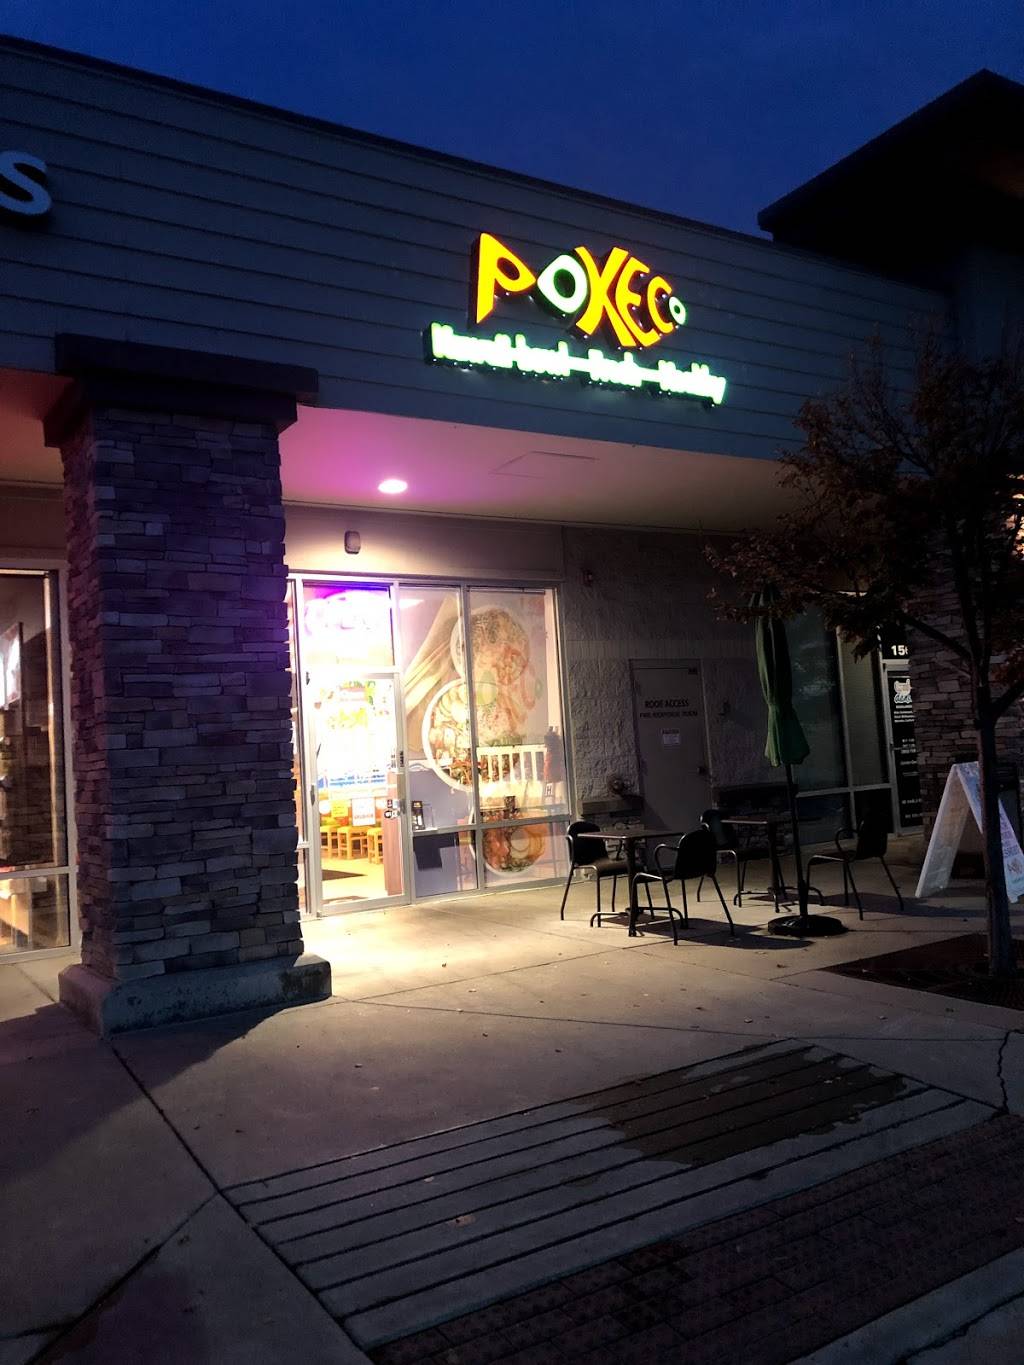 Pokeco | restaurant | 91 W Mineral Ave #140, Littleton, CO 80120, USA | 3037982202 OR +1 303-798-2202